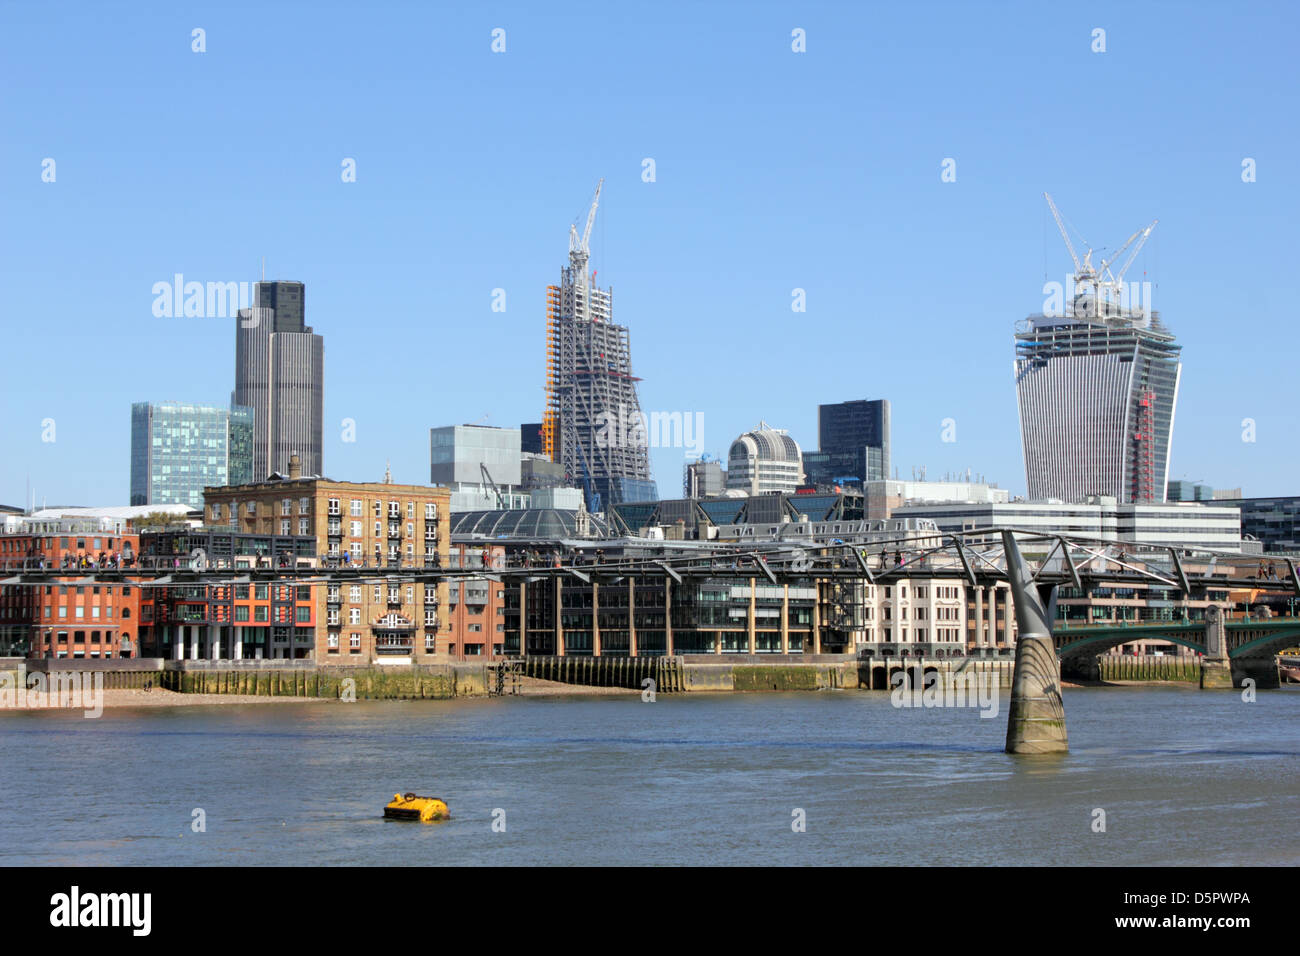 The Walkie-Talkie and Cheese Grater buildings under construction in the city of London, England, UK. Stock Photo